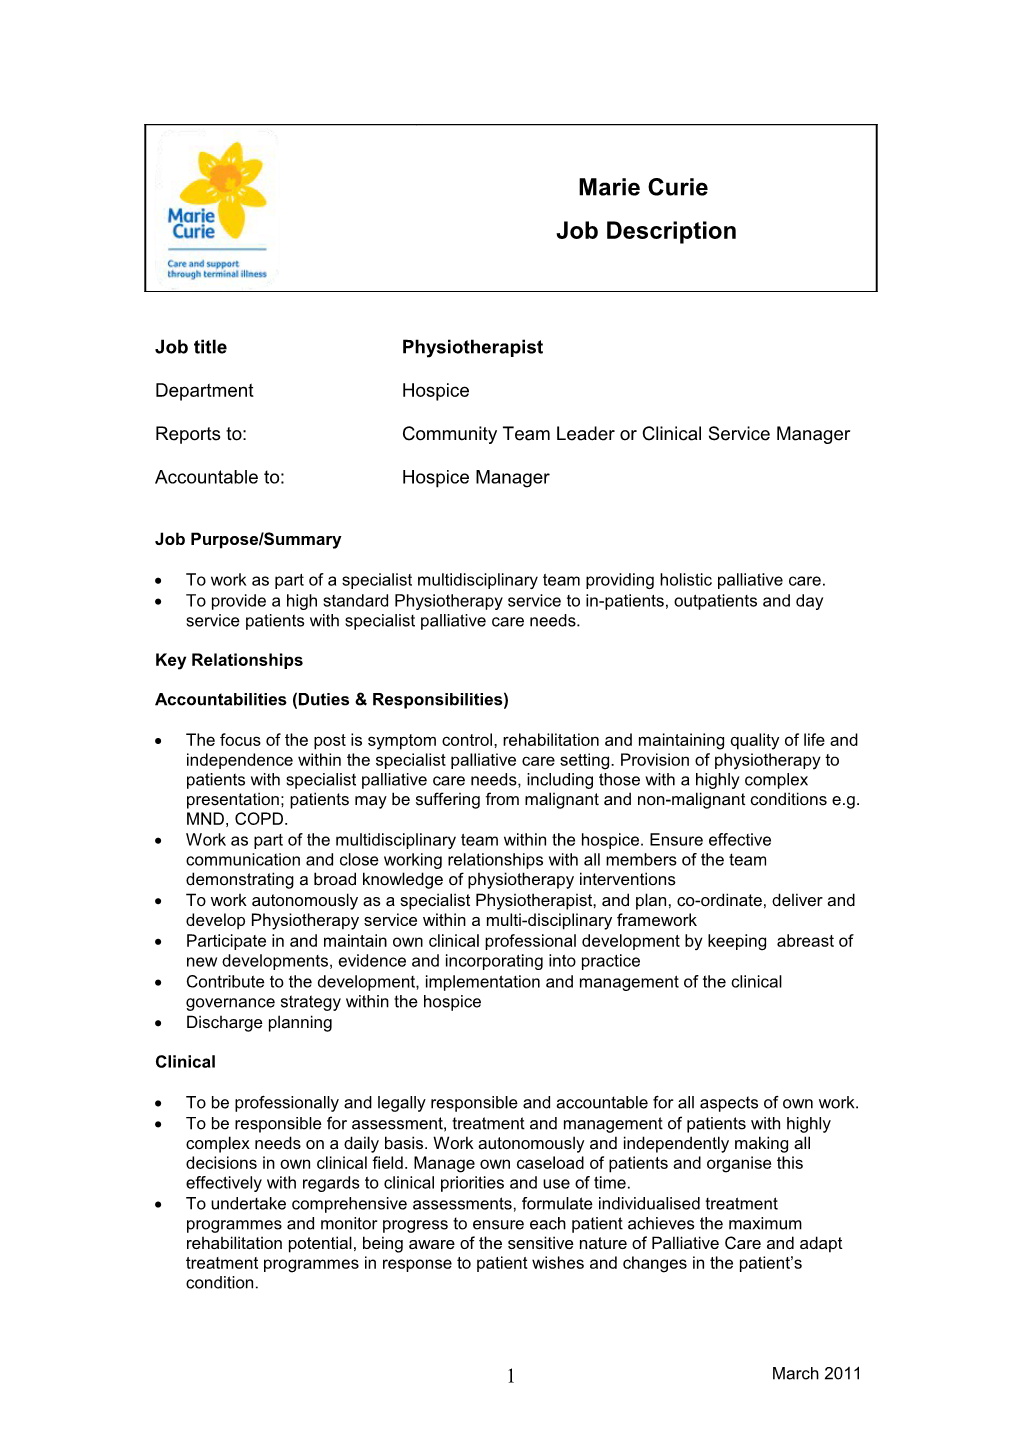 Reports To:Community Team Leader Or Clinical Service Manager